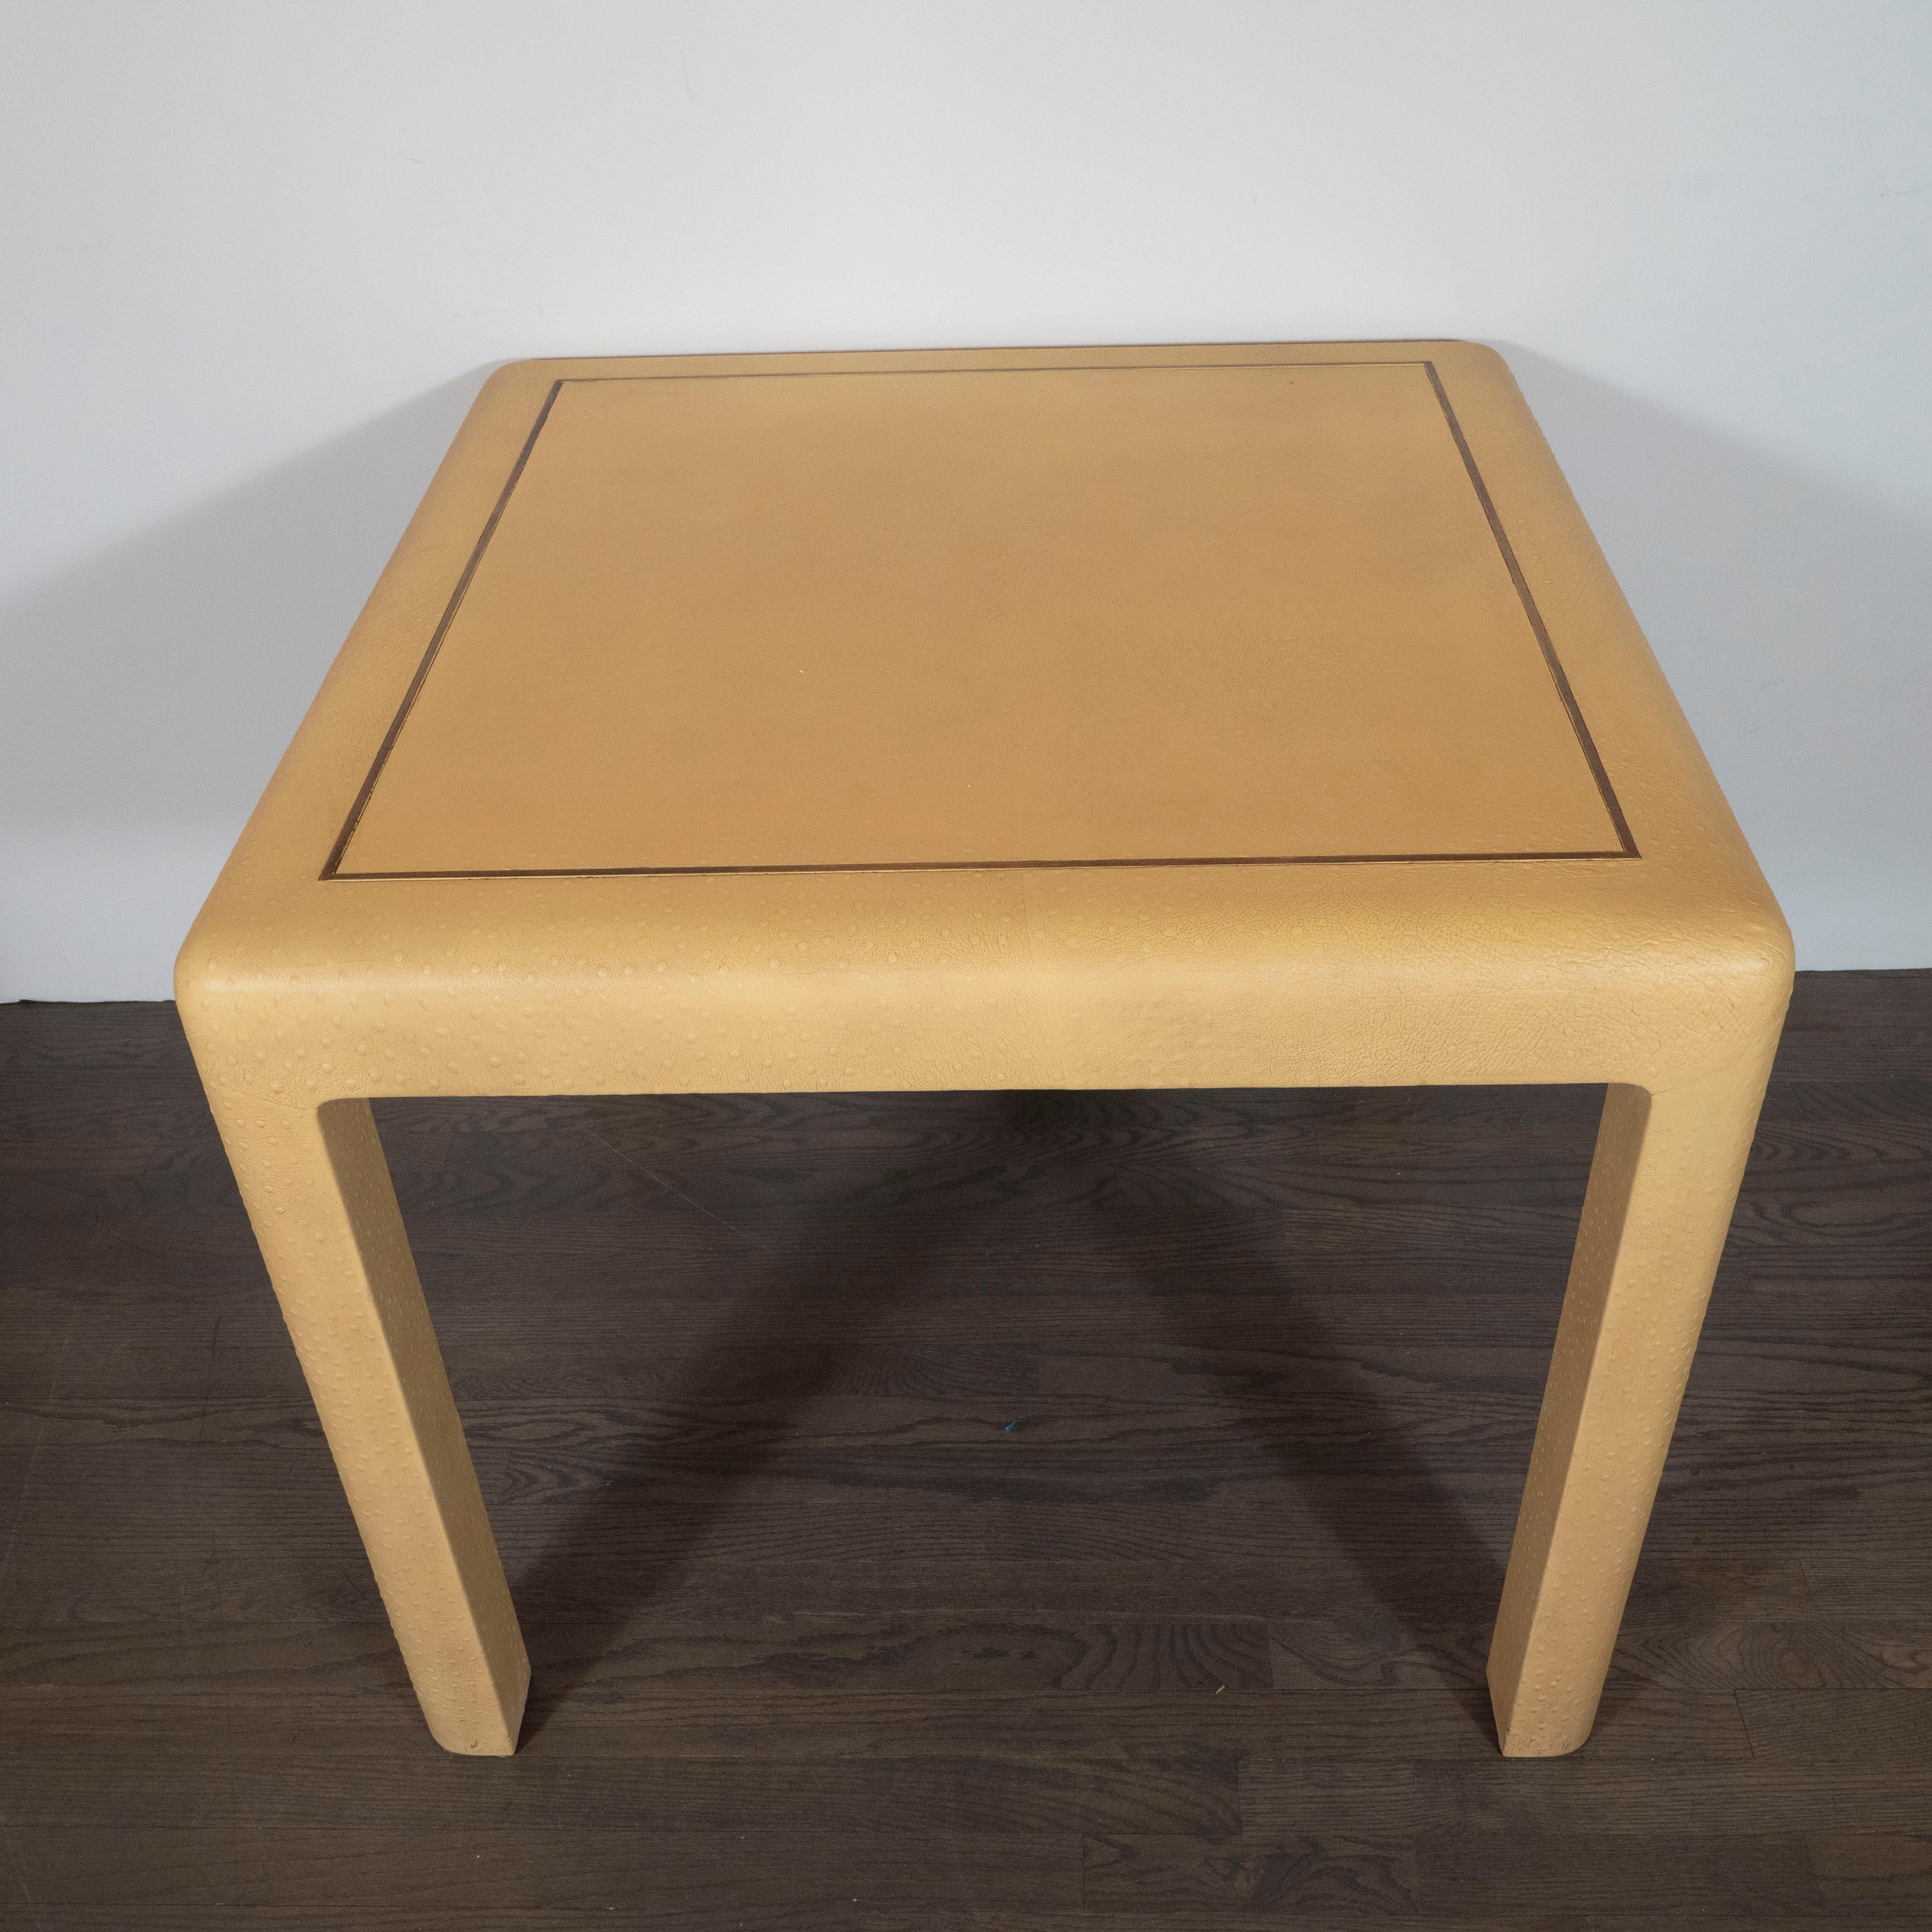 American Signed Mid-Century Modern Ostrich Game Table in Ostrich by Karl Springer